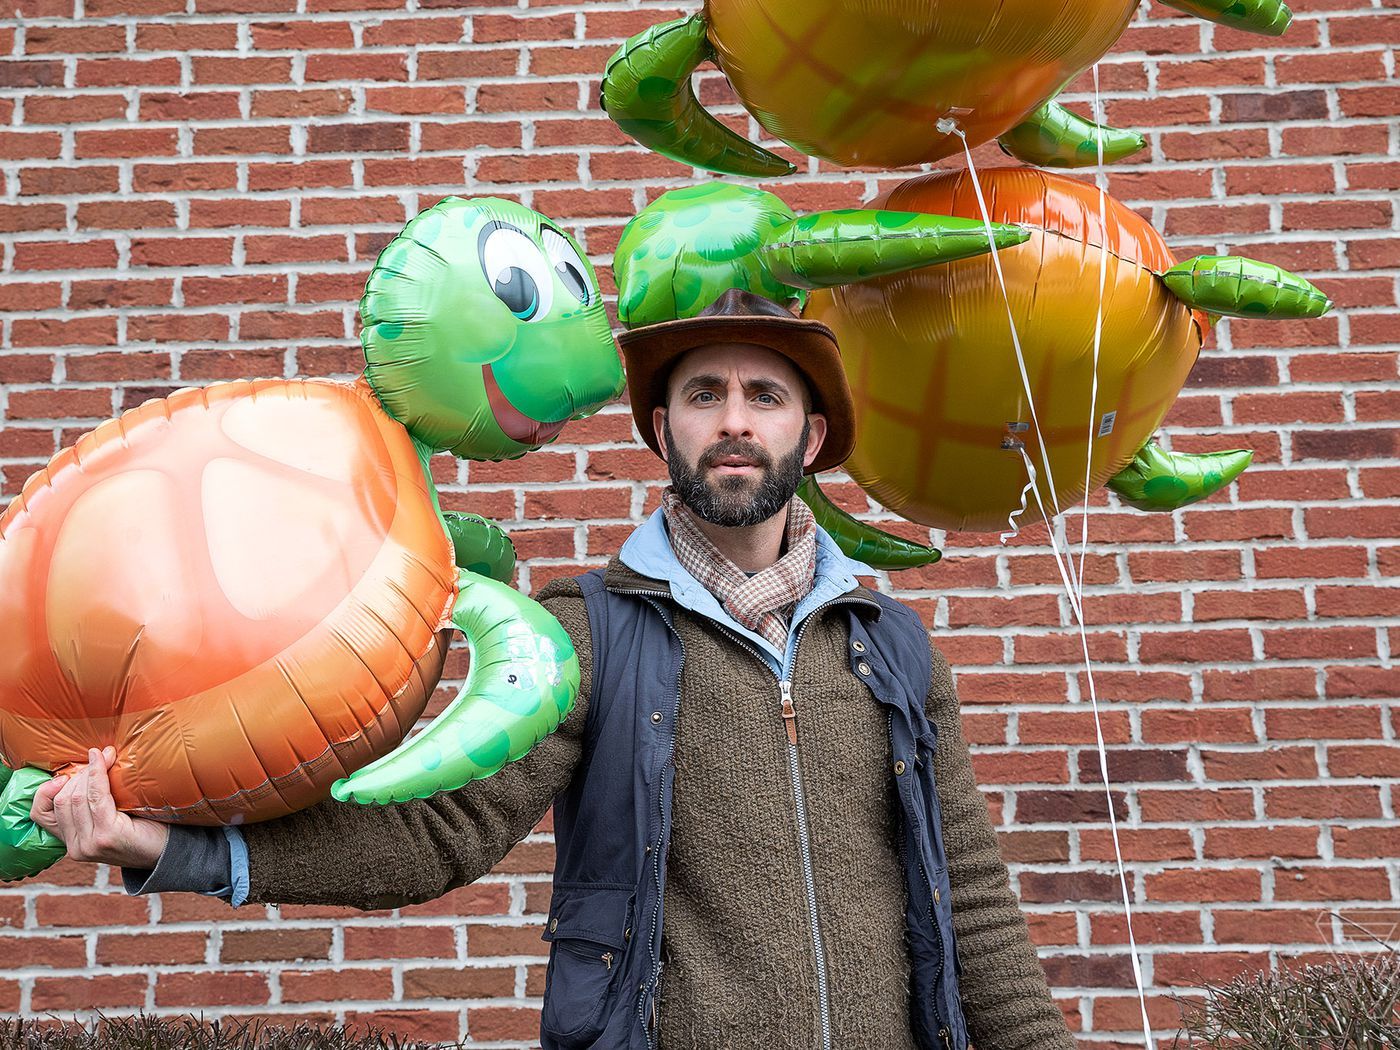 How Coyote Peterson built his YouTube channel Brave Wilderness